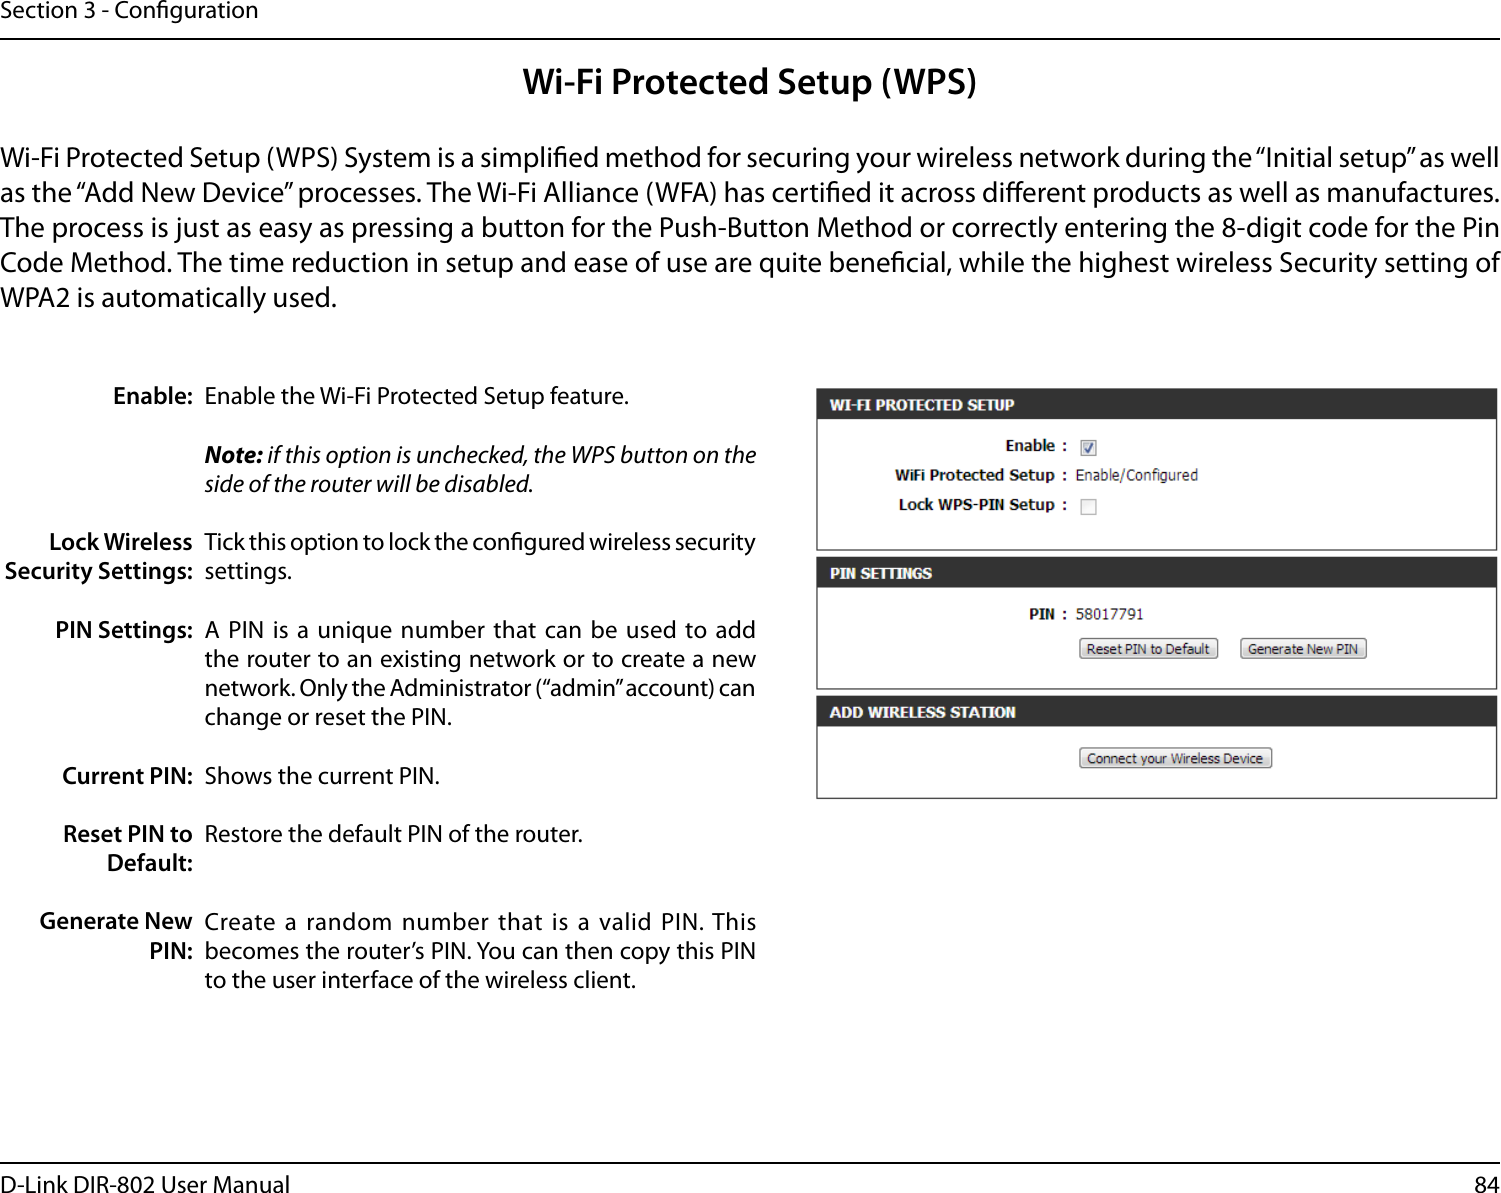 84D-Link DIR-802 User ManualSection 3 - CongurationWi-Fi Protected Setup (WPS)Enable the Wi-Fi Protected Setup feature. Note: if this option is unchecked, the WPS button on the side of the router will be disabled.Tick this option to lock the congured wireless security settings.A PIN  is a  unique  number that  can be used  to add the router to an existing network or to create a new network. Only the Administrator (“admin” account) can change or reset the PIN. Shows the current PIN. Restore the default PIN of the router. Create a random number that  is a  valid PIN. This becomes the router’s PIN. You can then copy this PIN to the user interface of the wireless client.Enable:Lock Wireless Security Settings:PIN Settings:Current PIN:Reset PIN to Default:Generate New PIN:Wi-Fi Protected Setup (WPS) System is a simplied method for securing your wireless network during the “Initial setup” as well as the “Add New Device” processes. The Wi-Fi Alliance (WFA) has certied it across dierent products as well as manufactures. The process is just as easy as pressing a button for the Push-Button Method or correctly entering the 8-digit code for the Pin Code Method. The time reduction in setup and ease of use are quite benecial, while the highest wireless Security setting of WPA2 is automatically used.